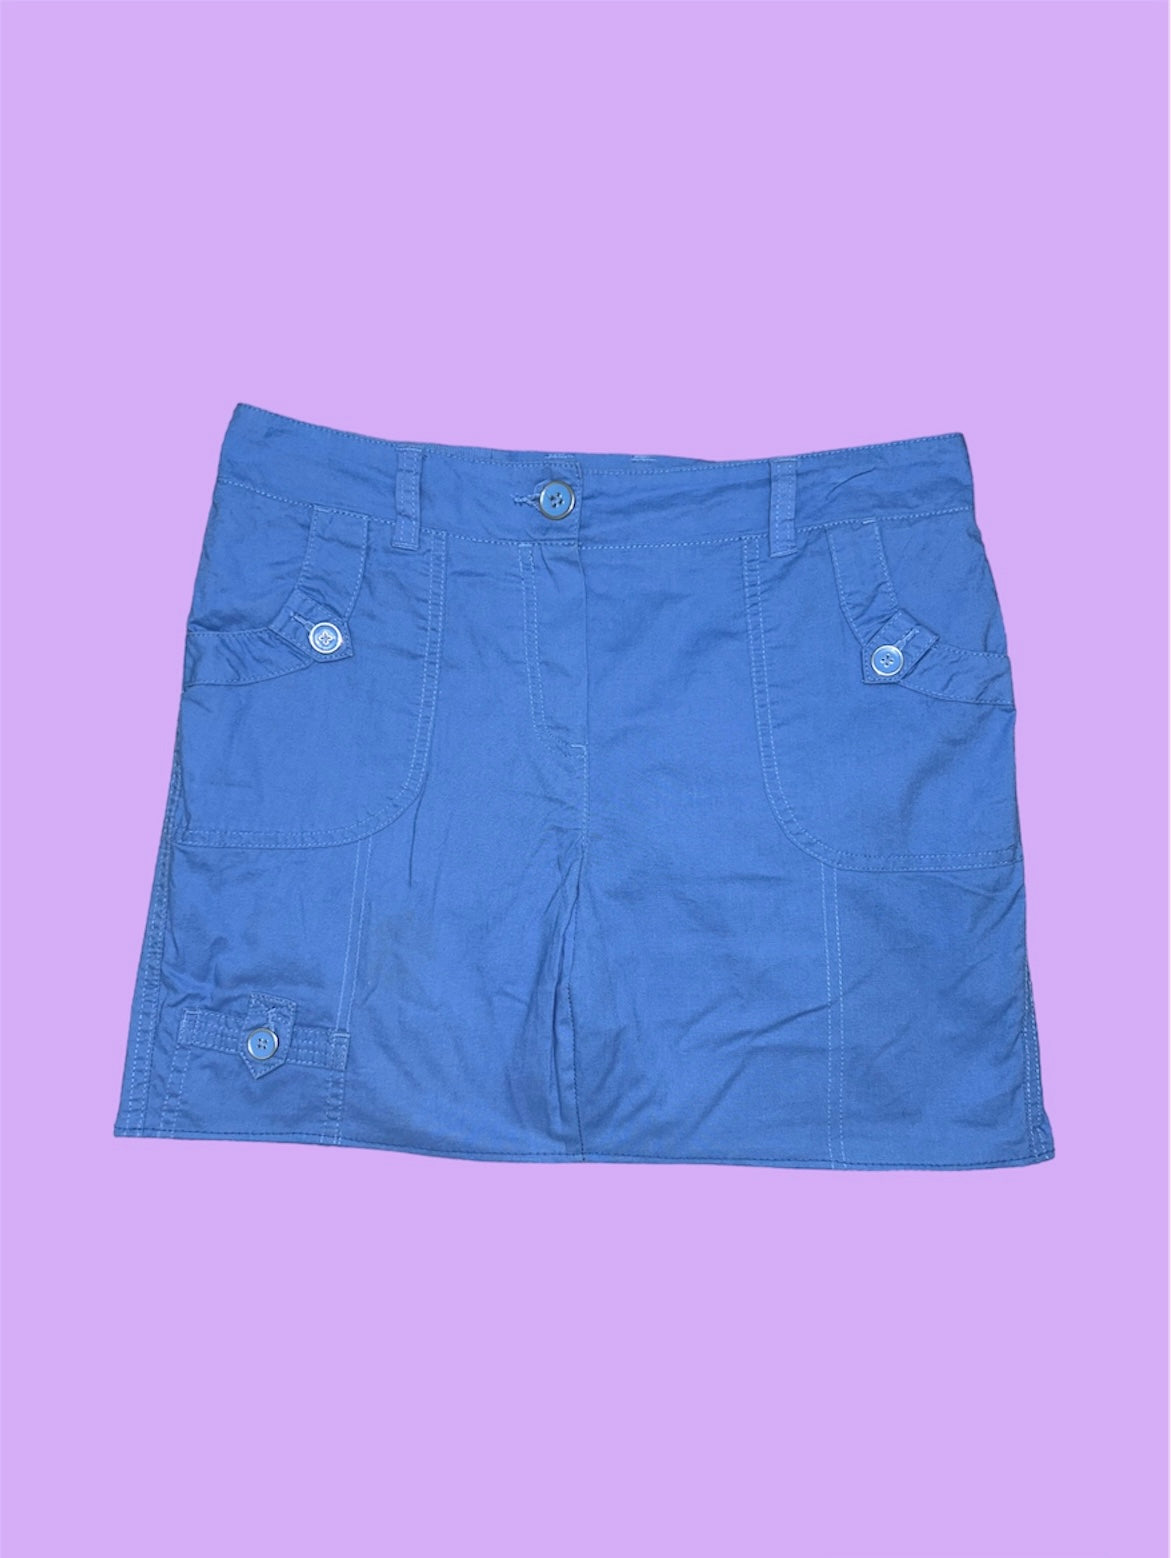 blue mini cargo skirt shown on a lilac background